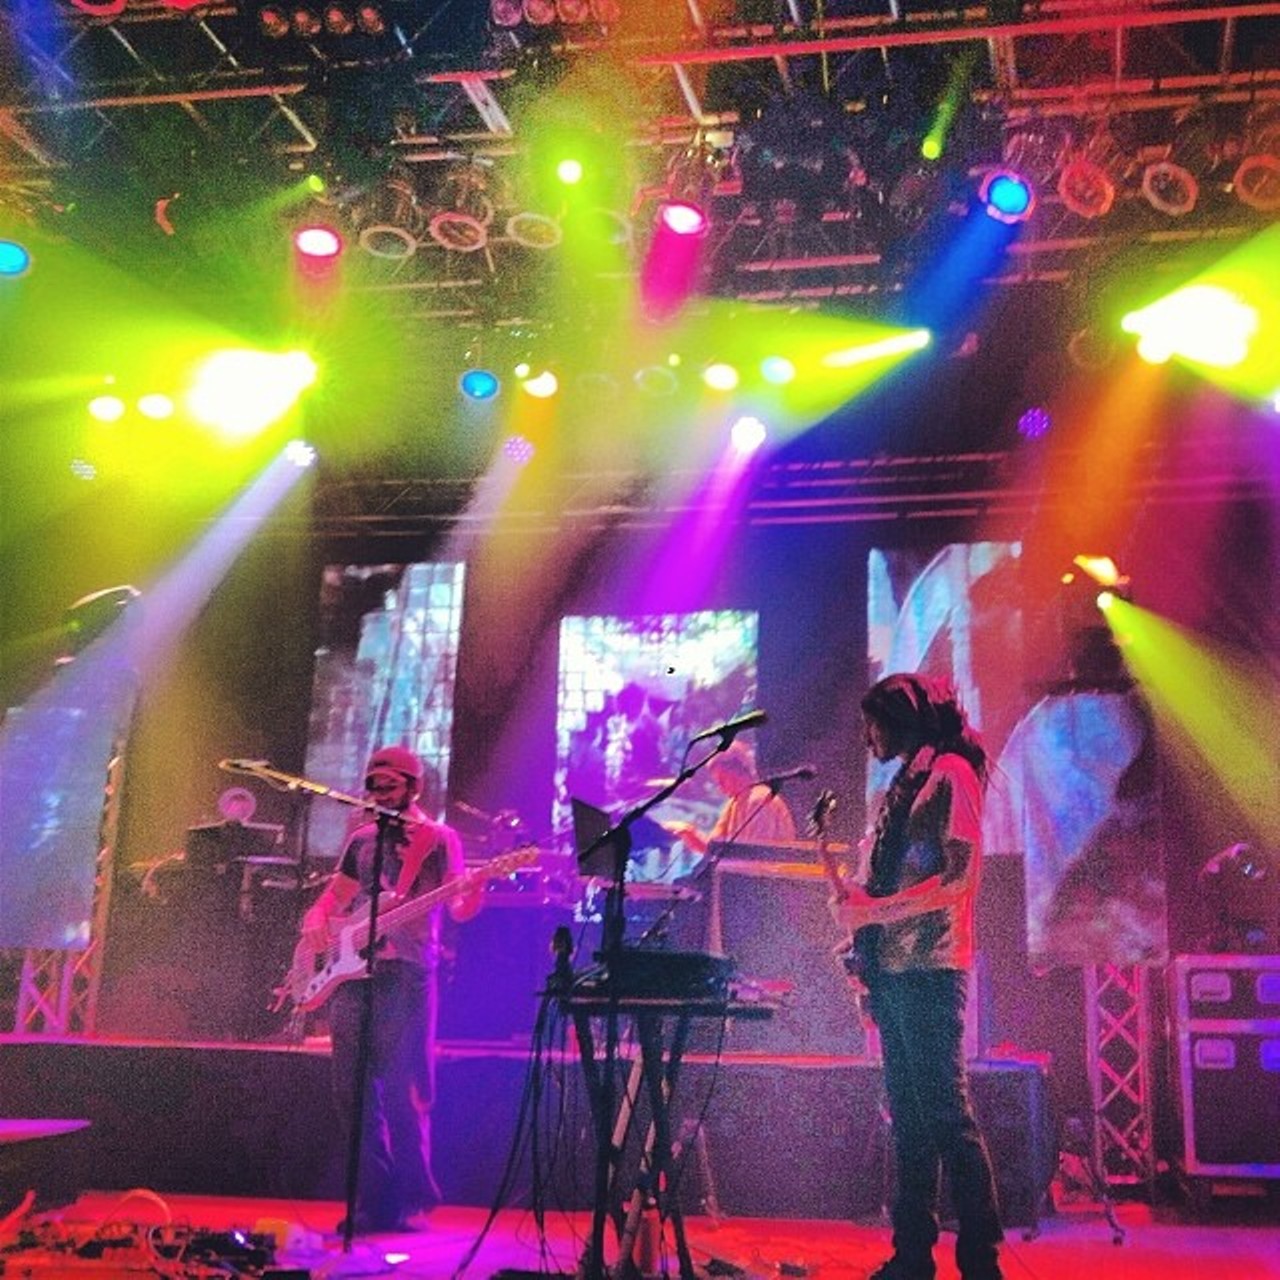 Movin and groovin with #papadosio